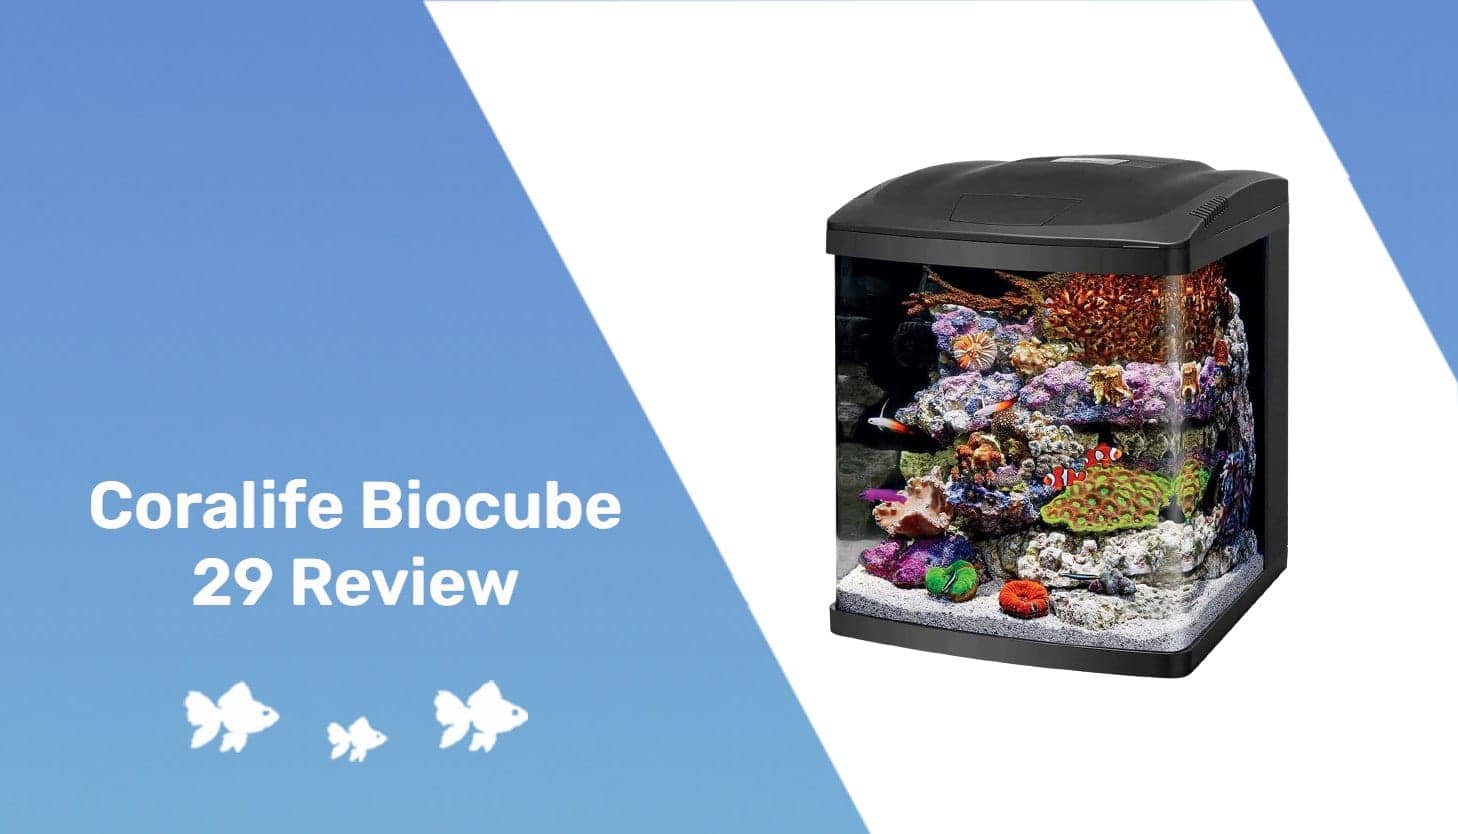 Coralife Biocube 29 Review